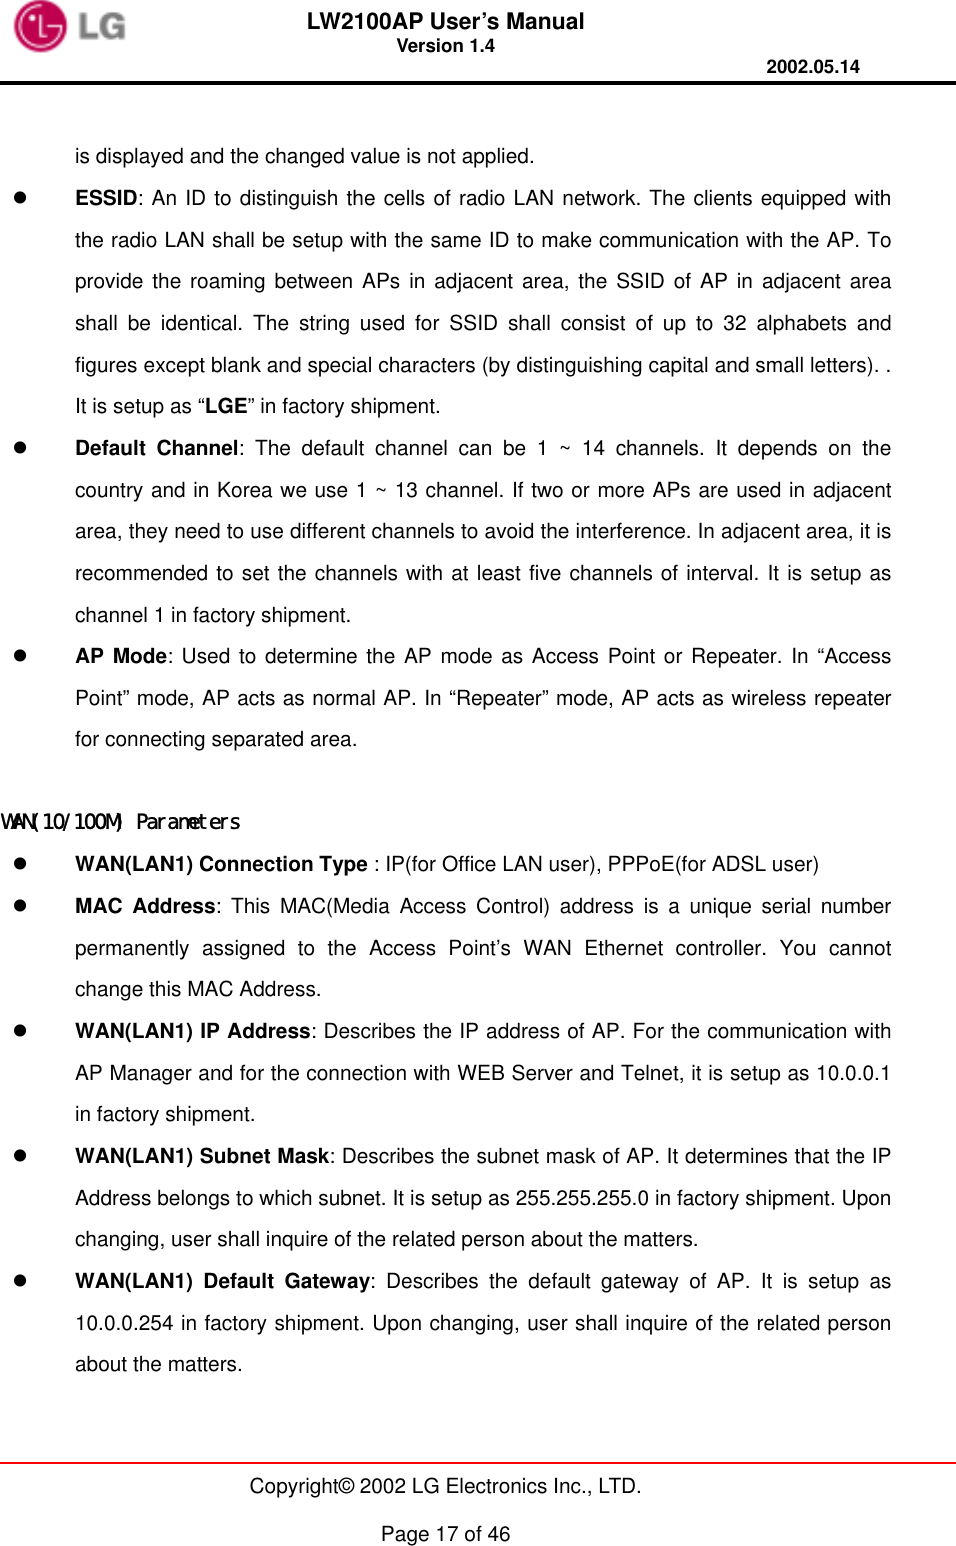 LW2100AP User’s Manual Version 1.4 2002.05.14   Copyright© 2002 LG Electronics Inc., LTD.  Page 17 of 46  is displayed and the changed value is not applied.   ESSID: An ID to distinguish the cells of radio LAN network. The clients equipped with the radio LAN shall be setup with the same ID to make communication with the AP. To provide the roaming between APs in adjacent area, the SSID of AP in adjacent area shall be identical. The string used for SSID shall consist of up to 32 alphabets and figures except blank and special characters (by distinguishing capital and small letters). . It is setup as “LGE” in factory shipment.   Default Channel: The default channel can be 1 ~ 14 channels. It depends on the country and in Korea we use 1 ~ 13 channel. If two or more APs are used in adjacent area, they need to use different channels to avoid the interference. In adjacent area, it is recommended to set the channels with at least five channels of interval. It is setup as channel 1 in factory shipment.   AP Mode: Used to determine the AP mode as Access Point or Repeater. In “Access Point” mode, AP acts as normal AP. In “Repeater” mode, AP acts as wireless repeater for connecting separated area.  WAN(10/100M) Parameters   WAN(LAN1) Connection Type : IP(for Office LAN user), PPPoE(for ADSL user)   MAC Address: This MAC(Media Access Control) address is a unique serial number permanently assigned to the Access Point’s WAN Ethernet controller. You cannot change this MAC Address.   WAN(LAN1) IP Address: Describes the IP address of AP. For the communication with AP Manager and for the connection with WEB Server and Telnet, it is setup as 10.0.0.1 in factory shipment.   WAN(LAN1) Subnet Mask: Describes the subnet mask of AP. It determines that the IP Address belongs to which subnet. It is setup as 255.255.255.0 in factory shipment. Upon changing, user shall inquire of the related person about the matters.   WAN(LAN1) Default Gateway: Describes the default gateway of AP. It is setup as 10.0.0.254 in factory shipment. Upon changing, user shall inquire of the related person about the matters. 